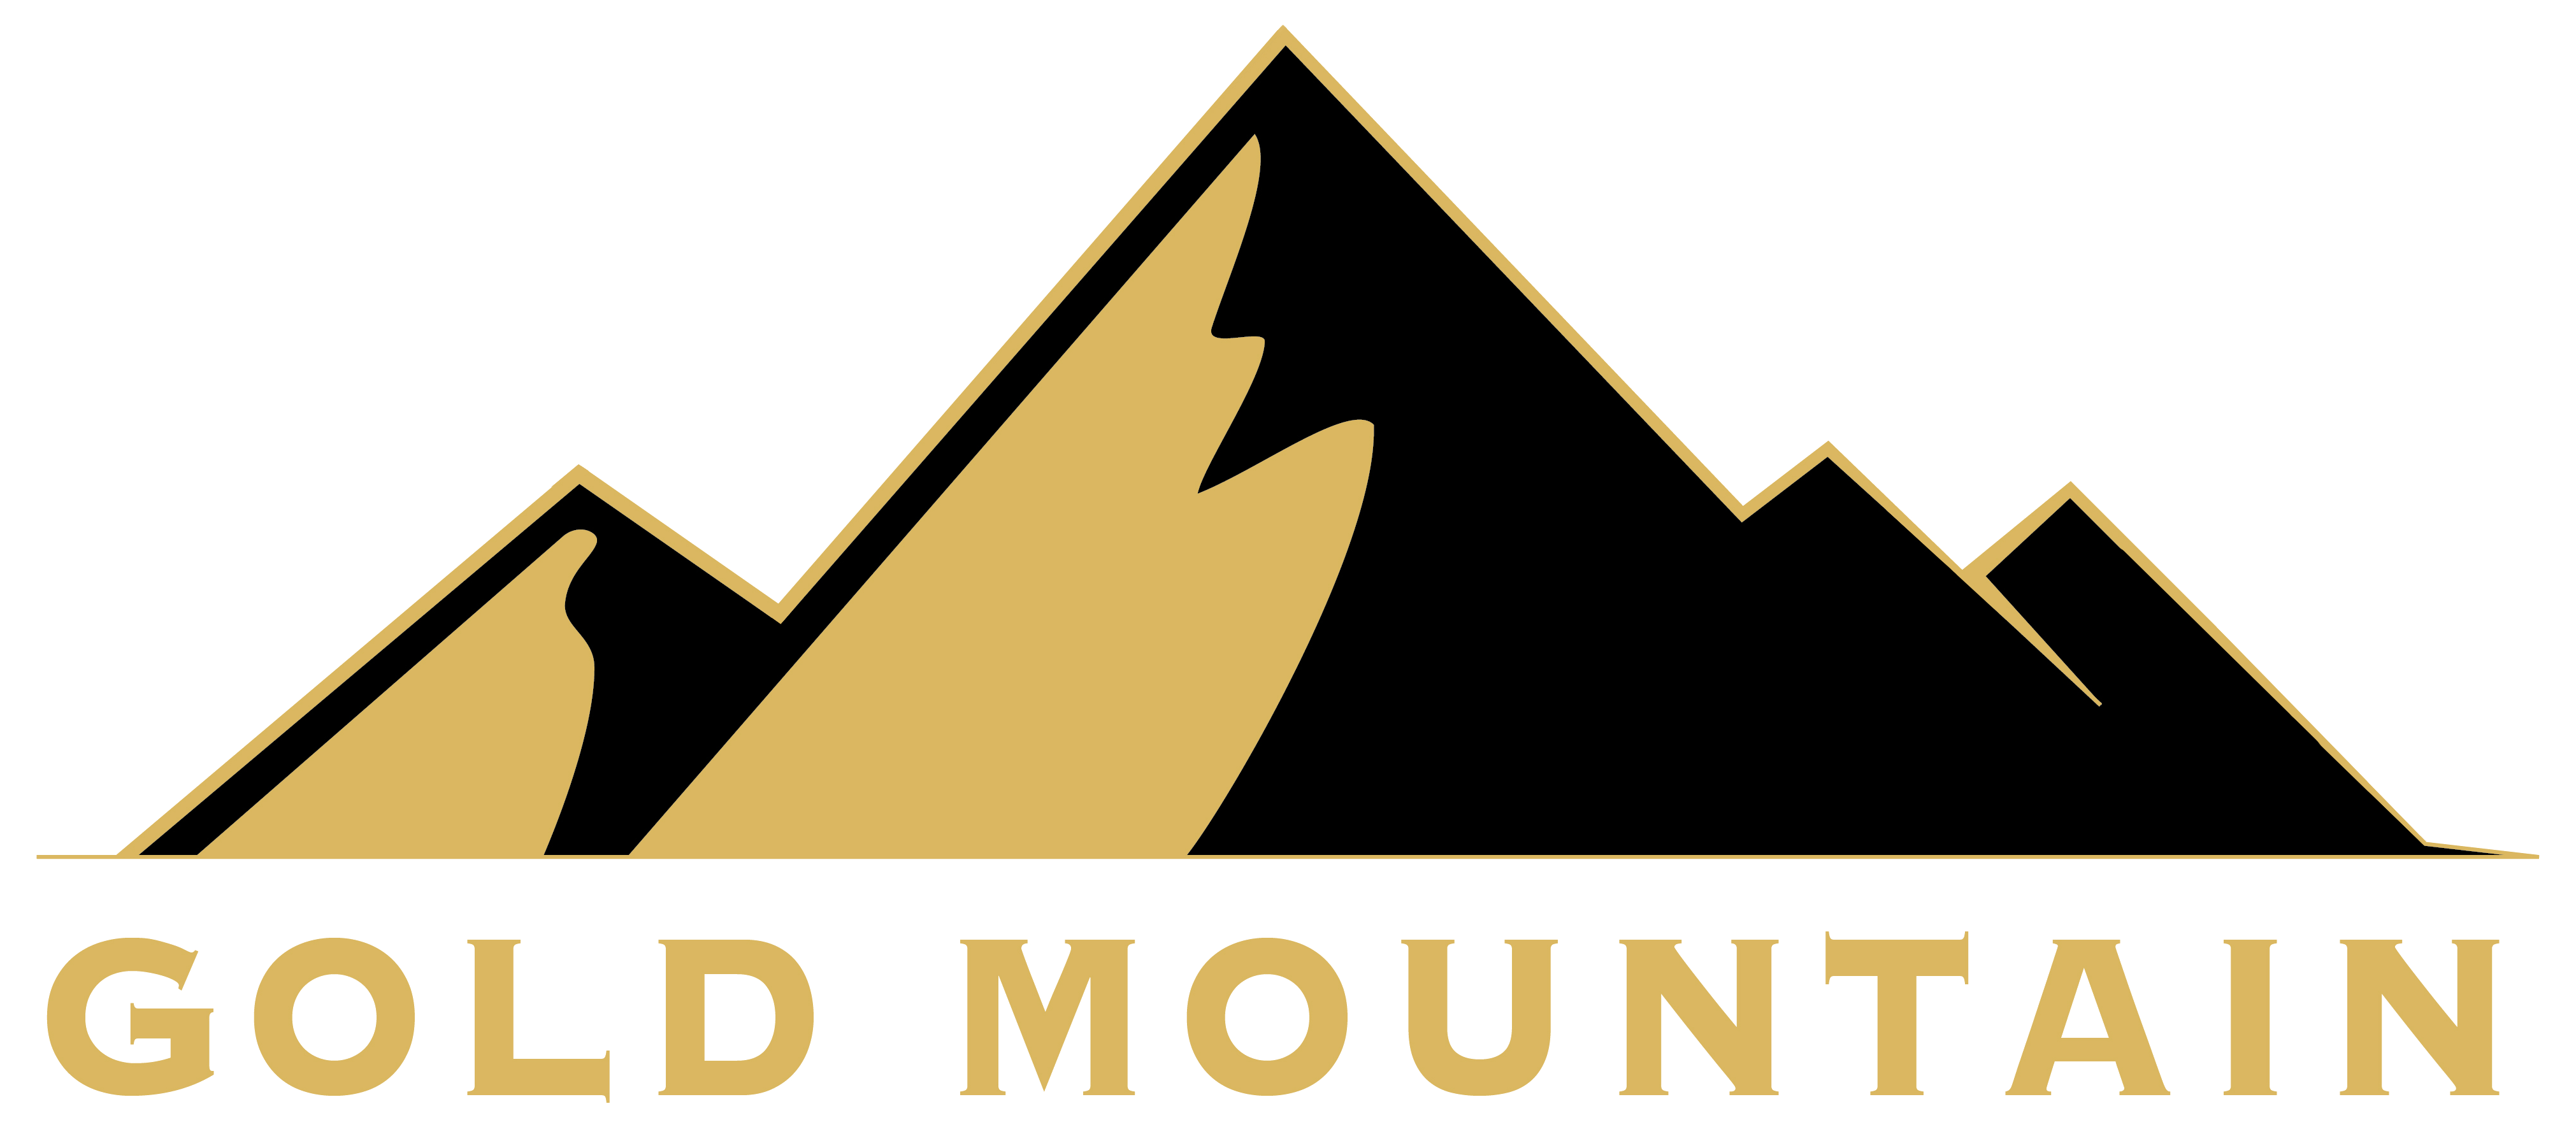 Gold Mountain Mining Corp, Tuesday, February 23, 2021, Press release picture